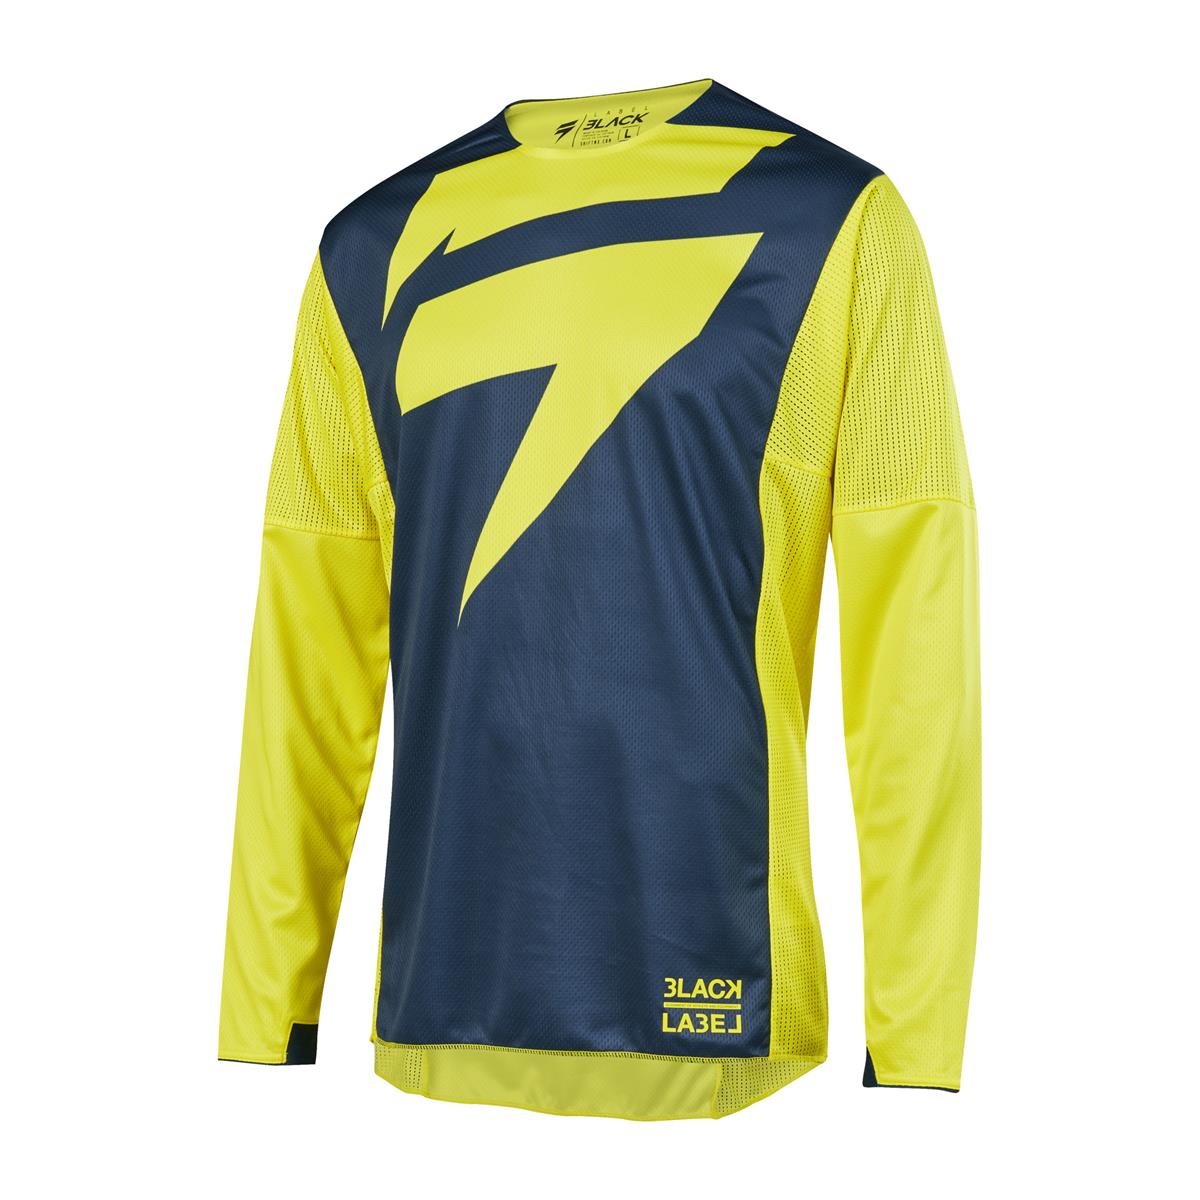 Shift Jersey 3lack Label Mainline Yellow/Navy